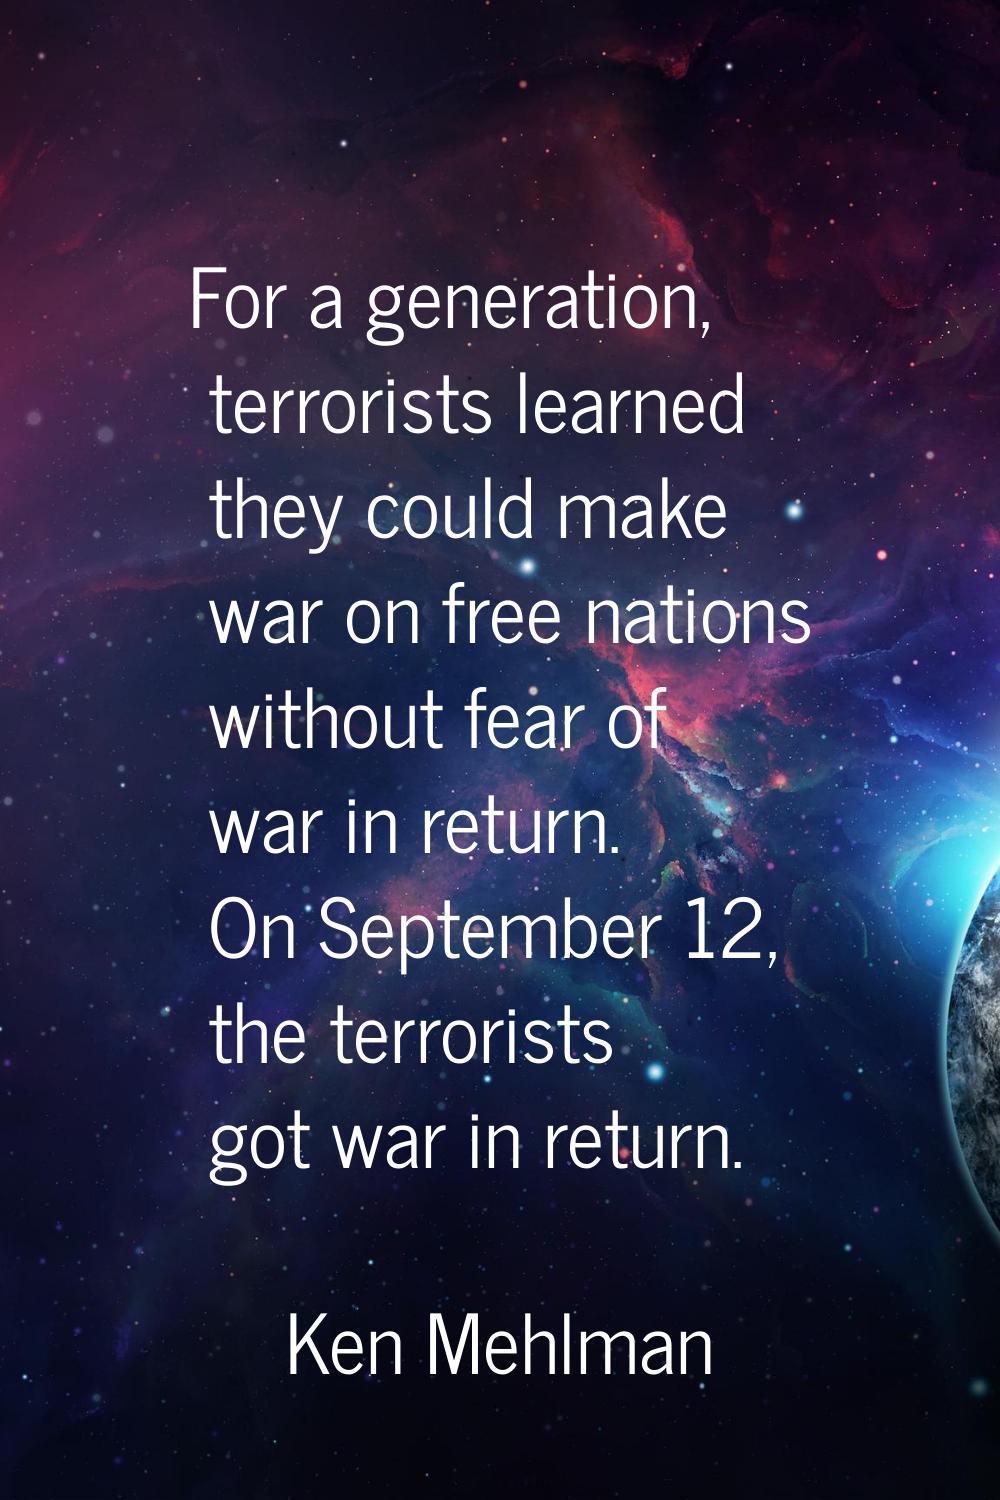 For a generation, terrorists learned they could make war on free nations without fear of war in ret